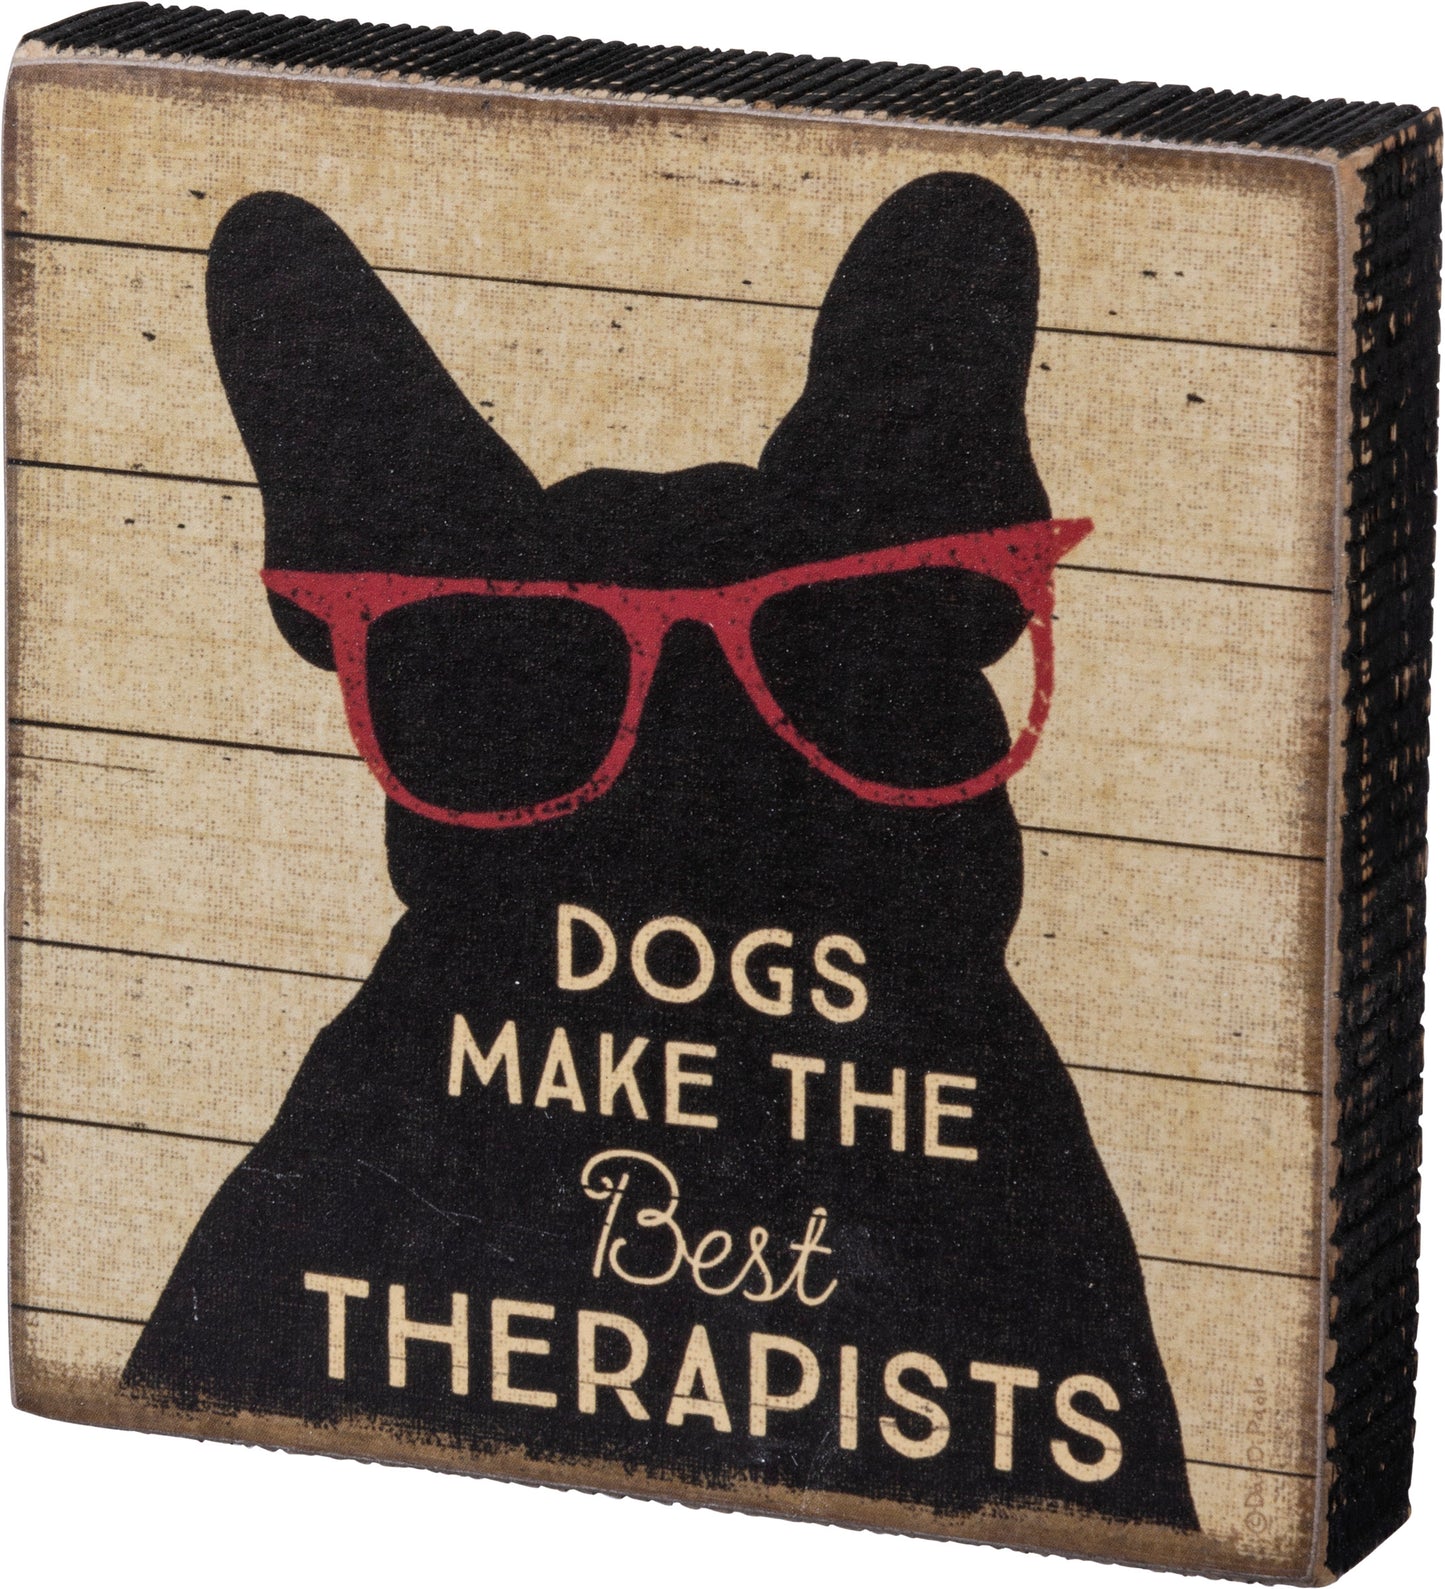 Block Sign - "Dogs Make the Best Therapists"